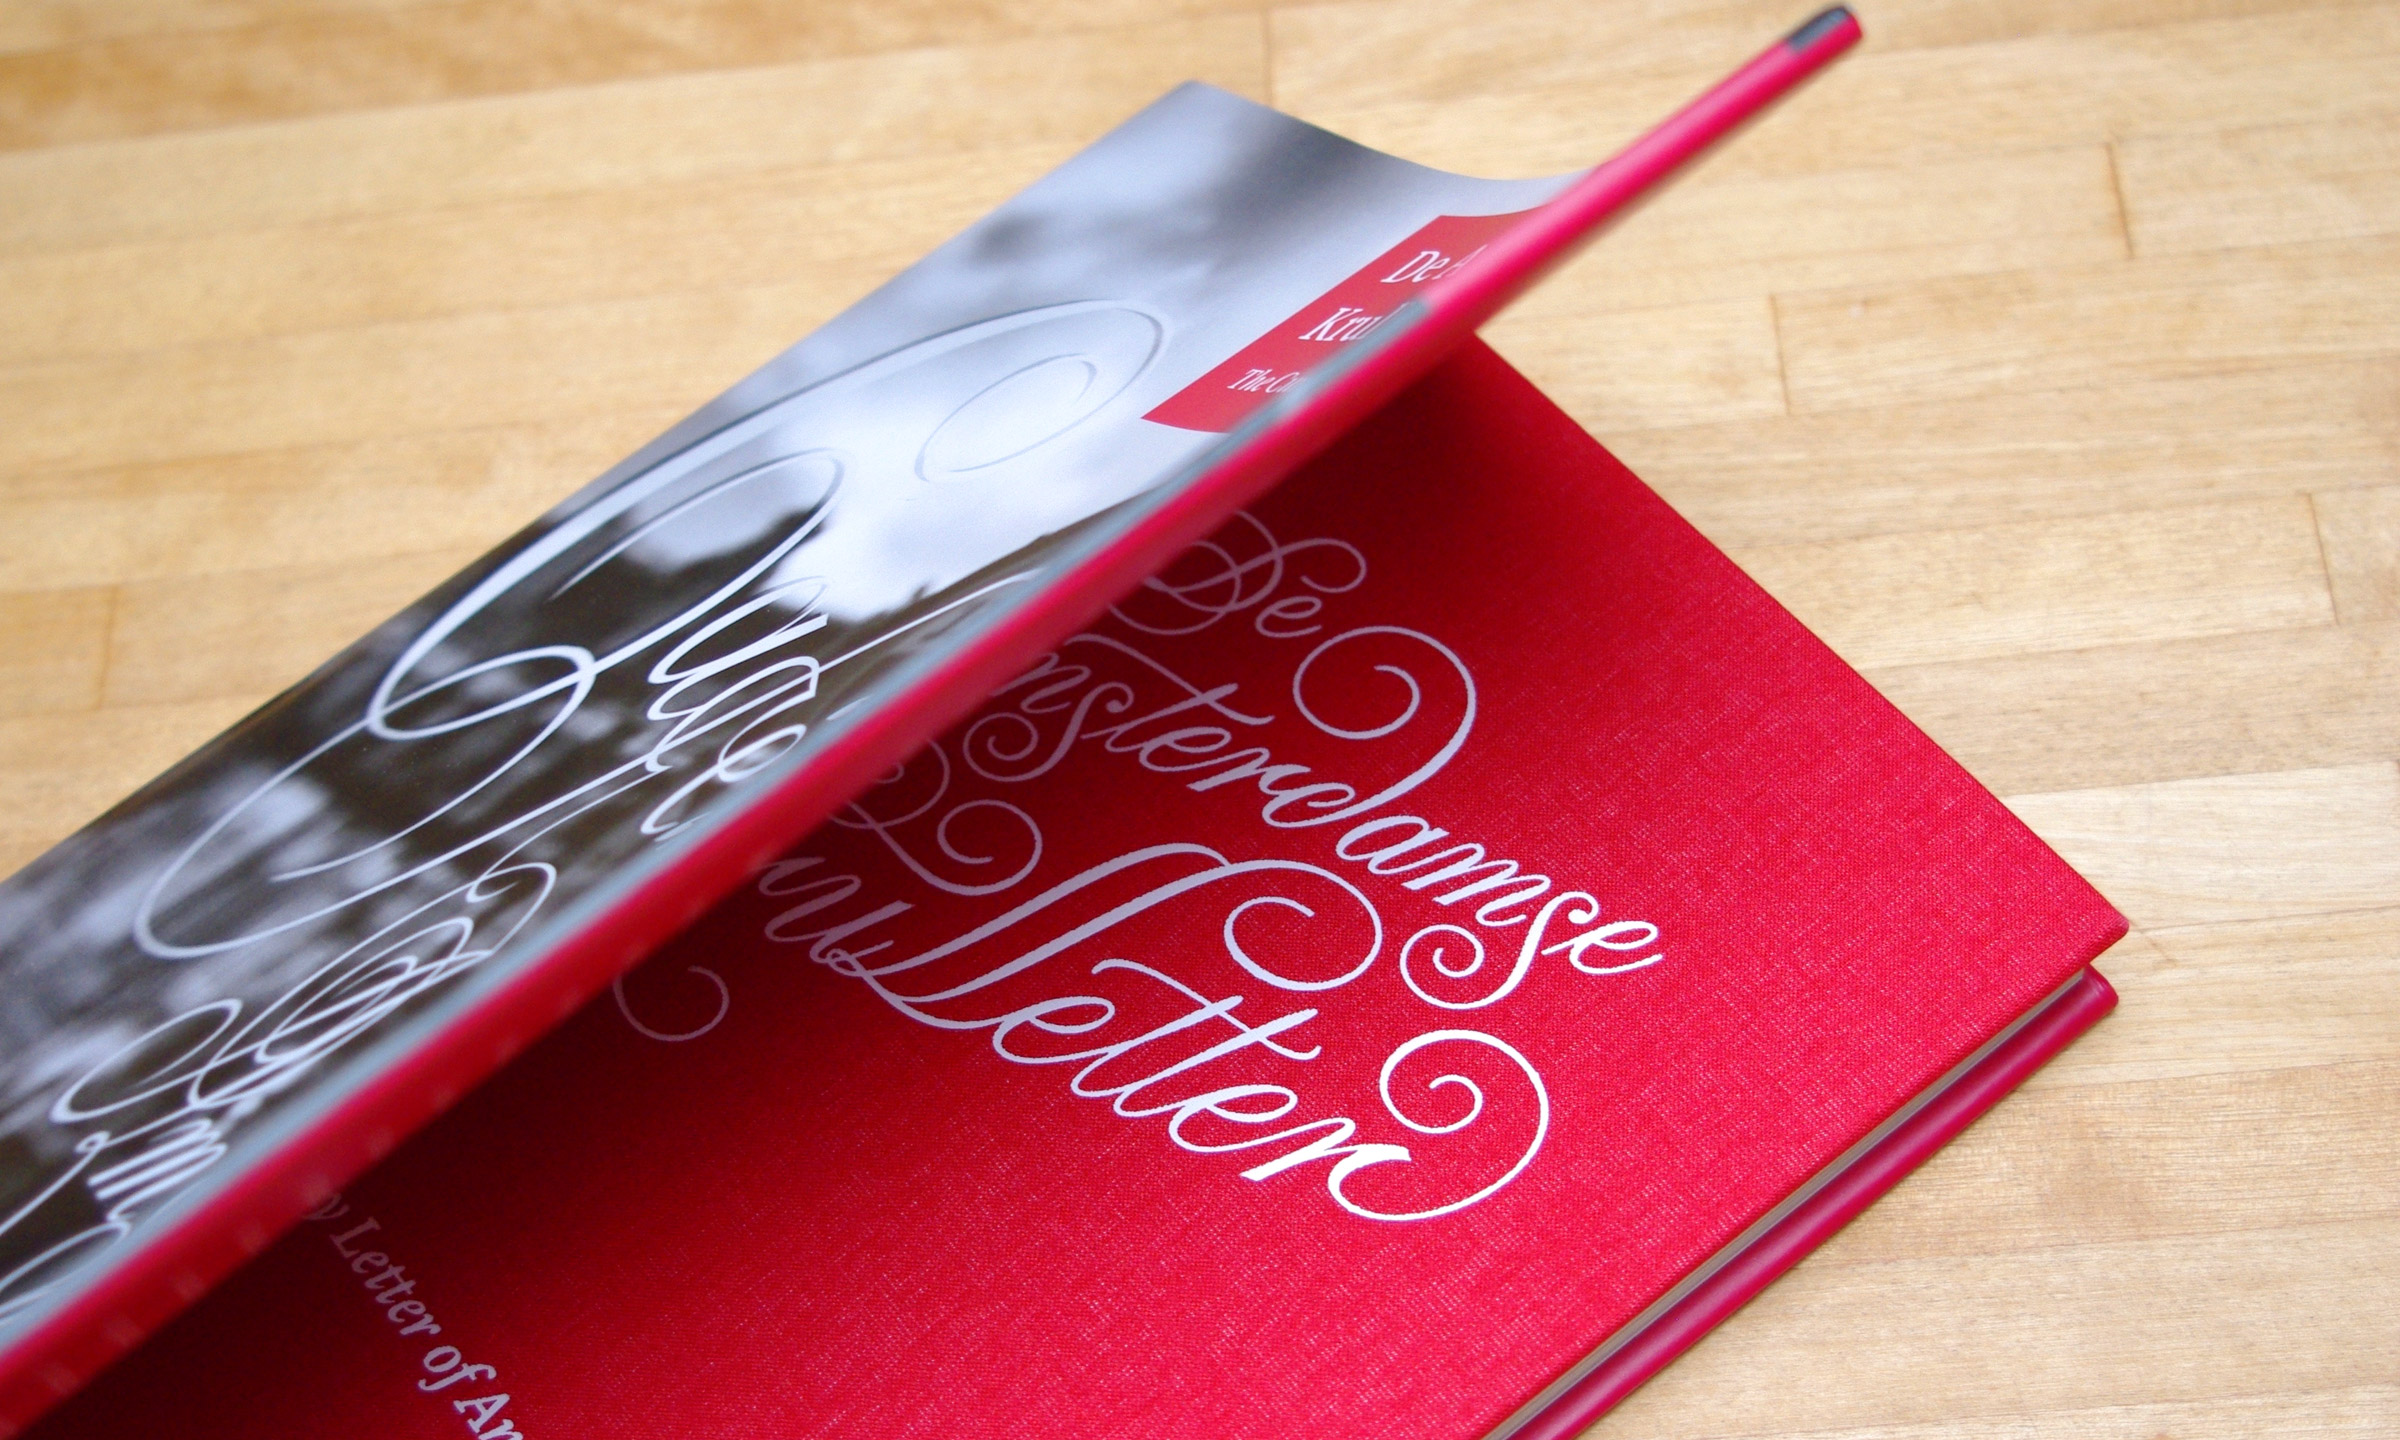 Taking off the dust jacket reveals the beautifully lettered red cloth cover.